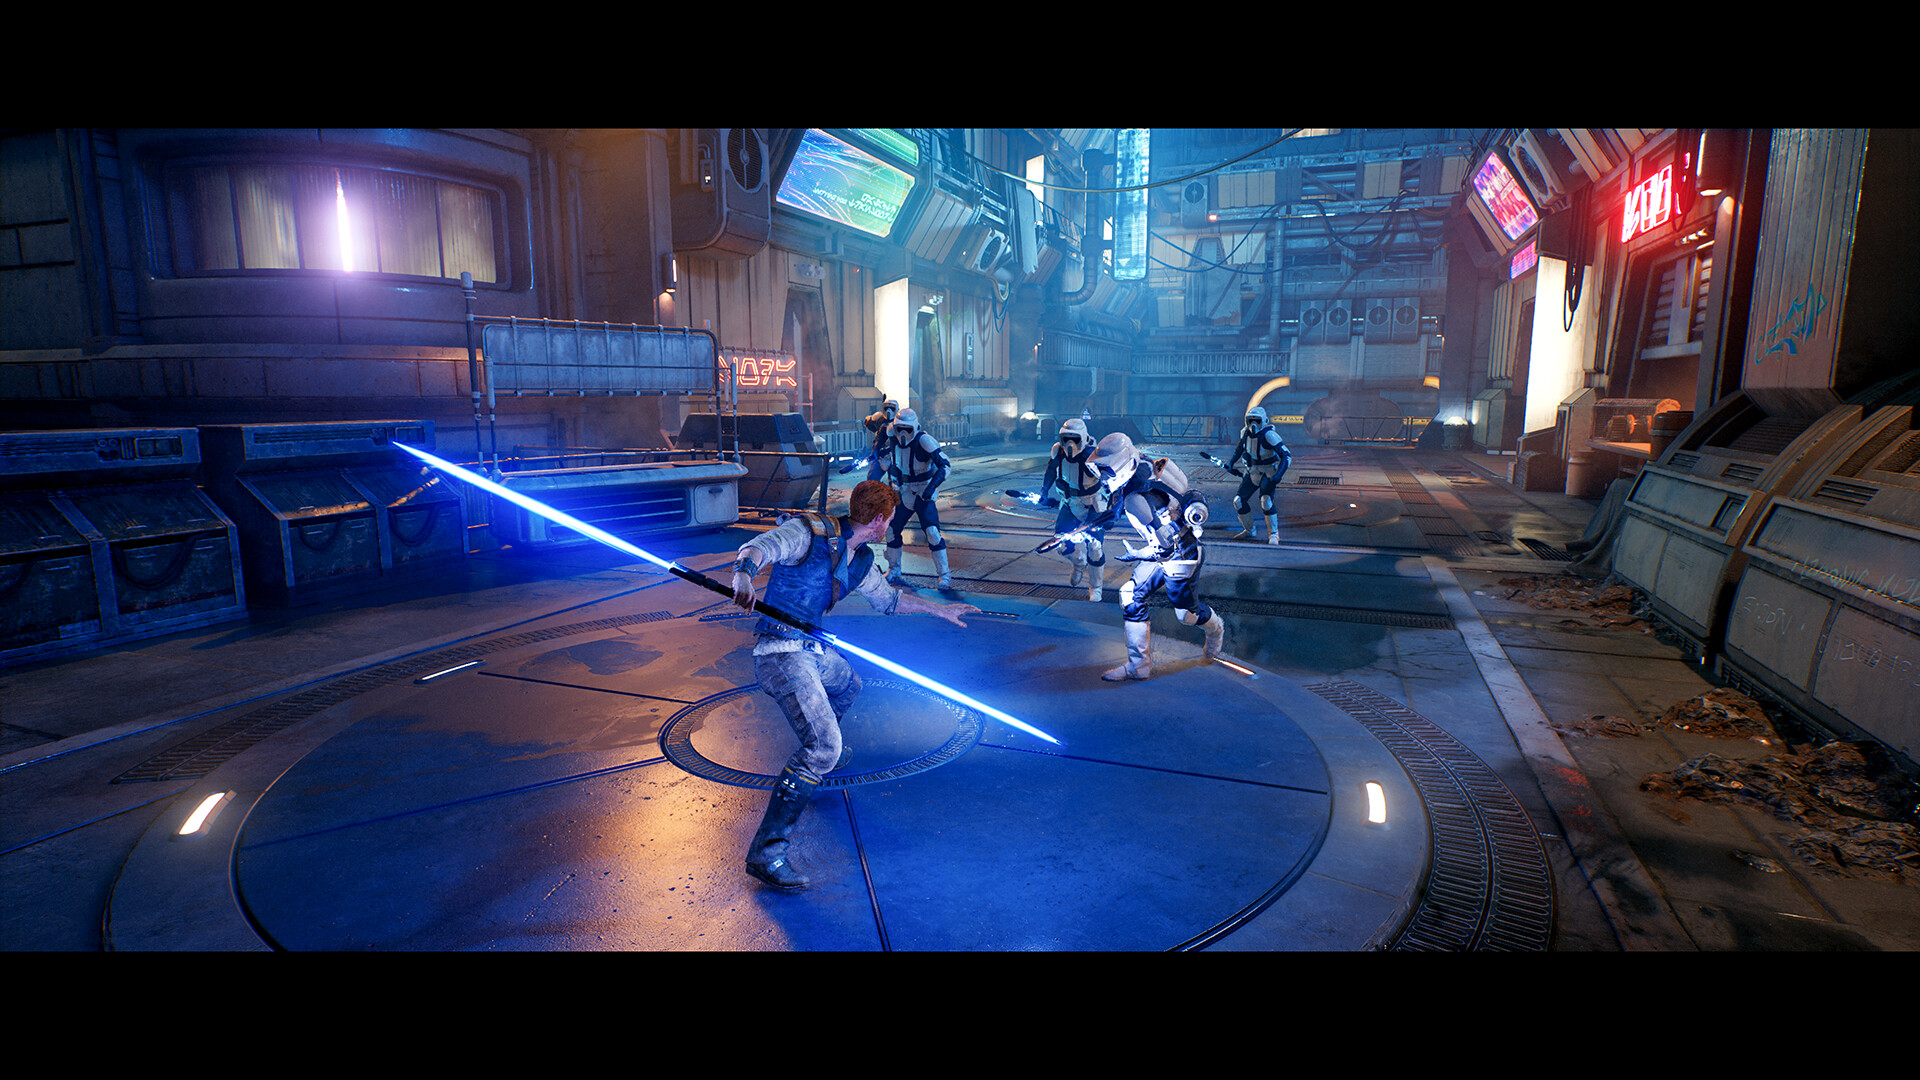 Star Wars Jedi Survivor's Cal wielding a double-balded lightsaber as several Stormtroopers approach him